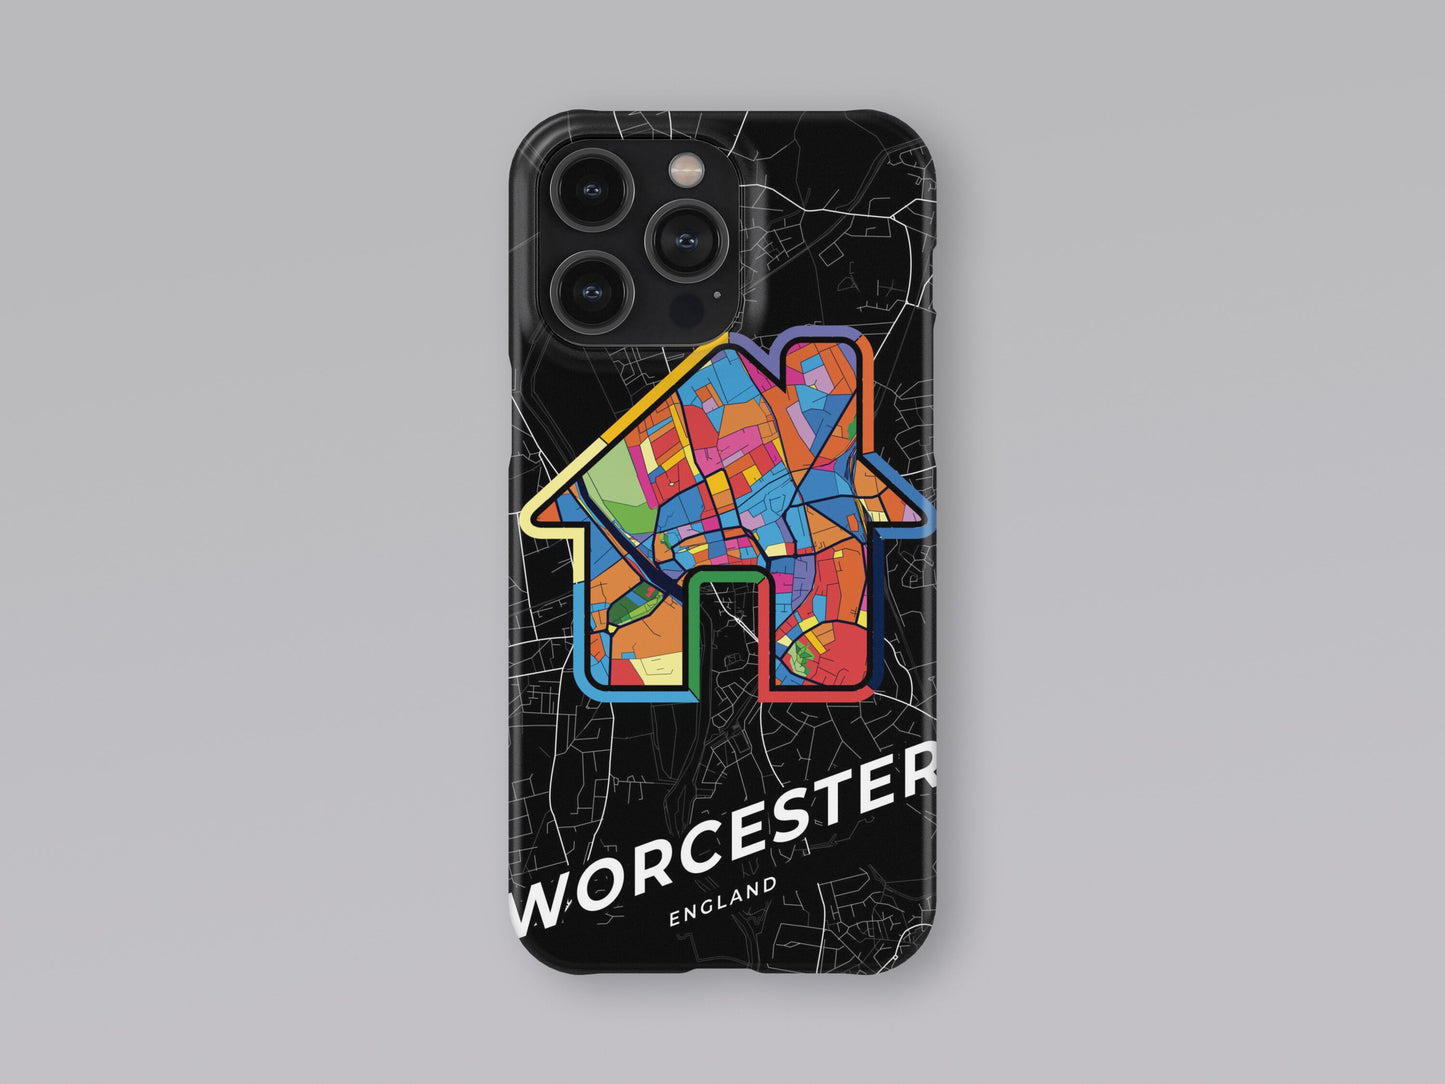 Worcester England slim phone case with colorful icon 3